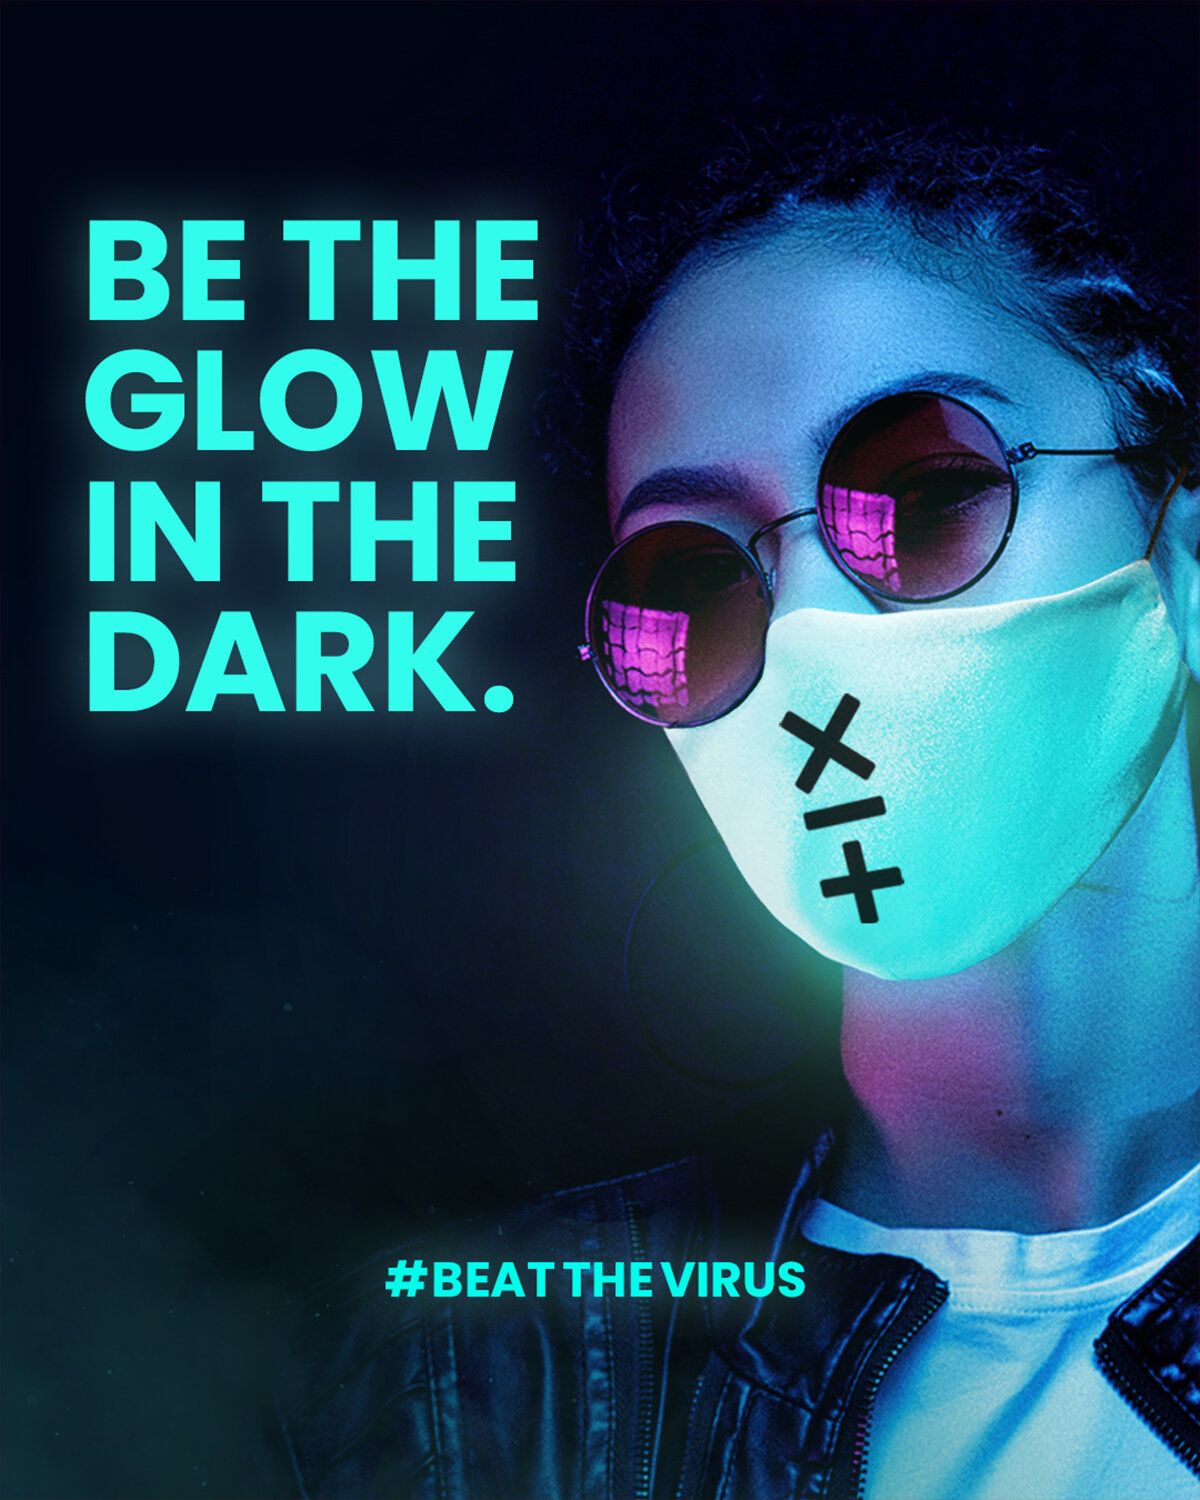 Be the glow in the dark.